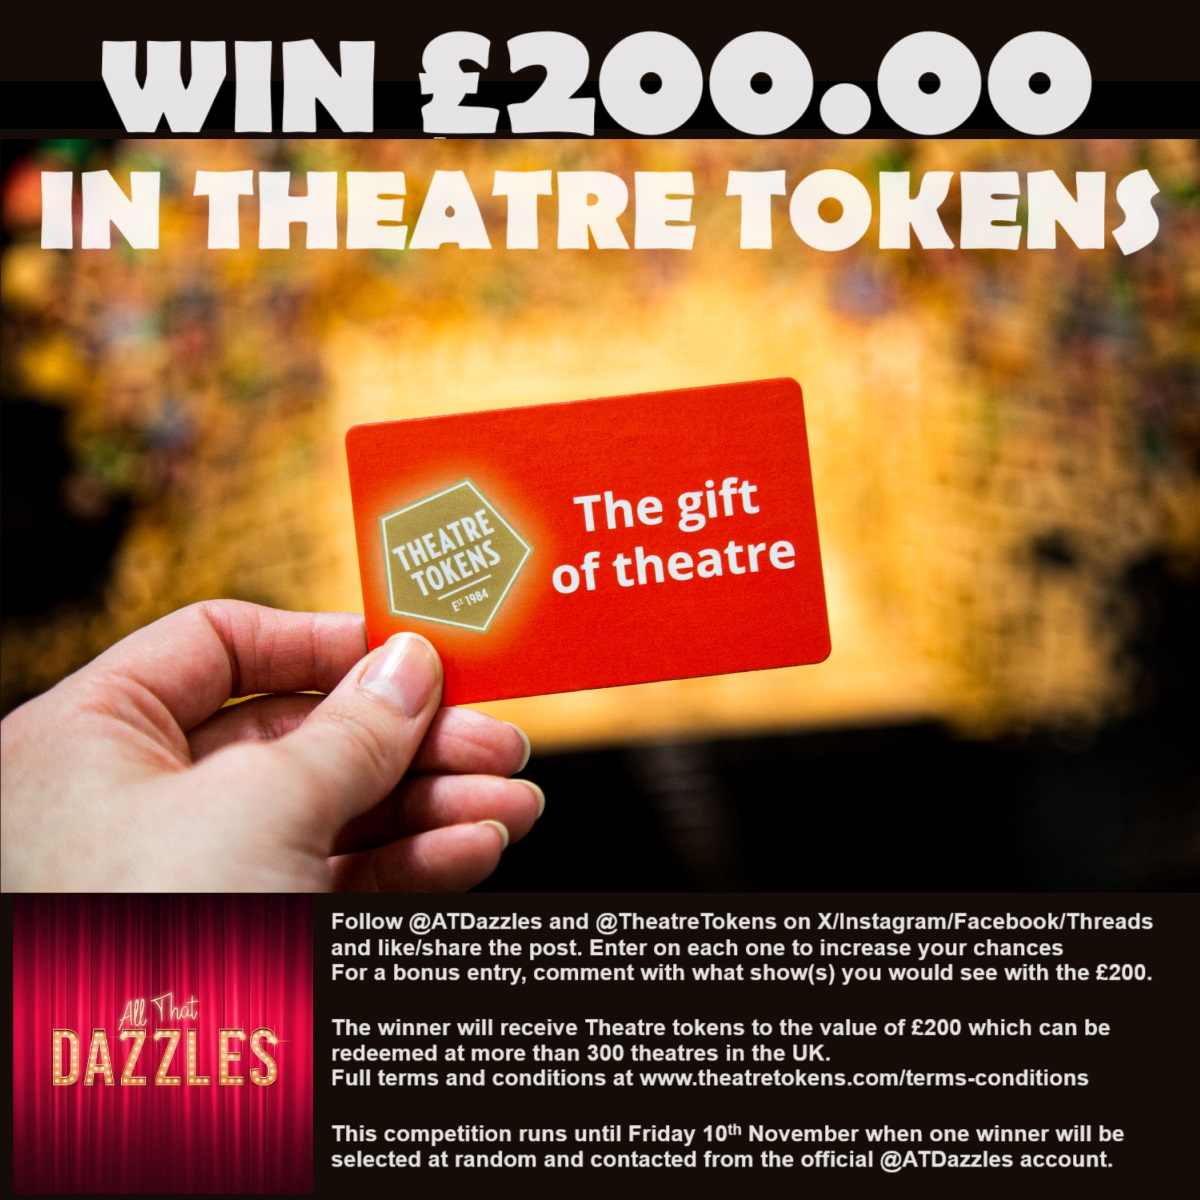 NEW GIVEAWAY ALERT! I've teamed up with @TheatreTokens to offer £200.00 worth of Theatre Tokens. To enter, like or repost this. For a bonus entry, reply with what show(s) you'd book with the tokens if you win. You must be following me to enter. The winner will be picked on 10/11